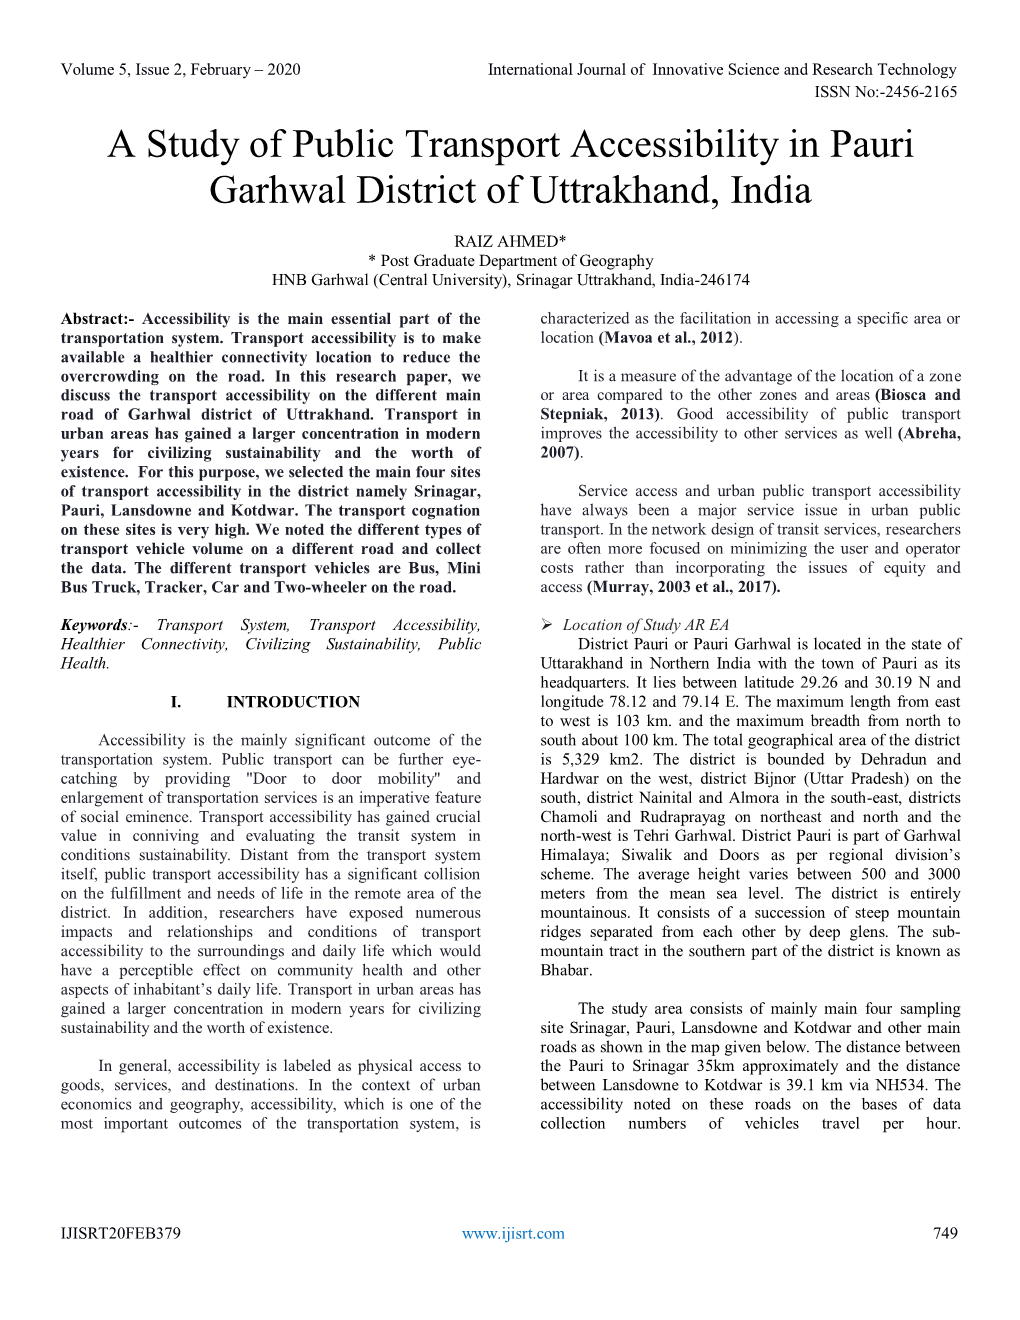 A Study of Public Transport Accessibility in Pauri Garhwal District of Uttrakhand, India